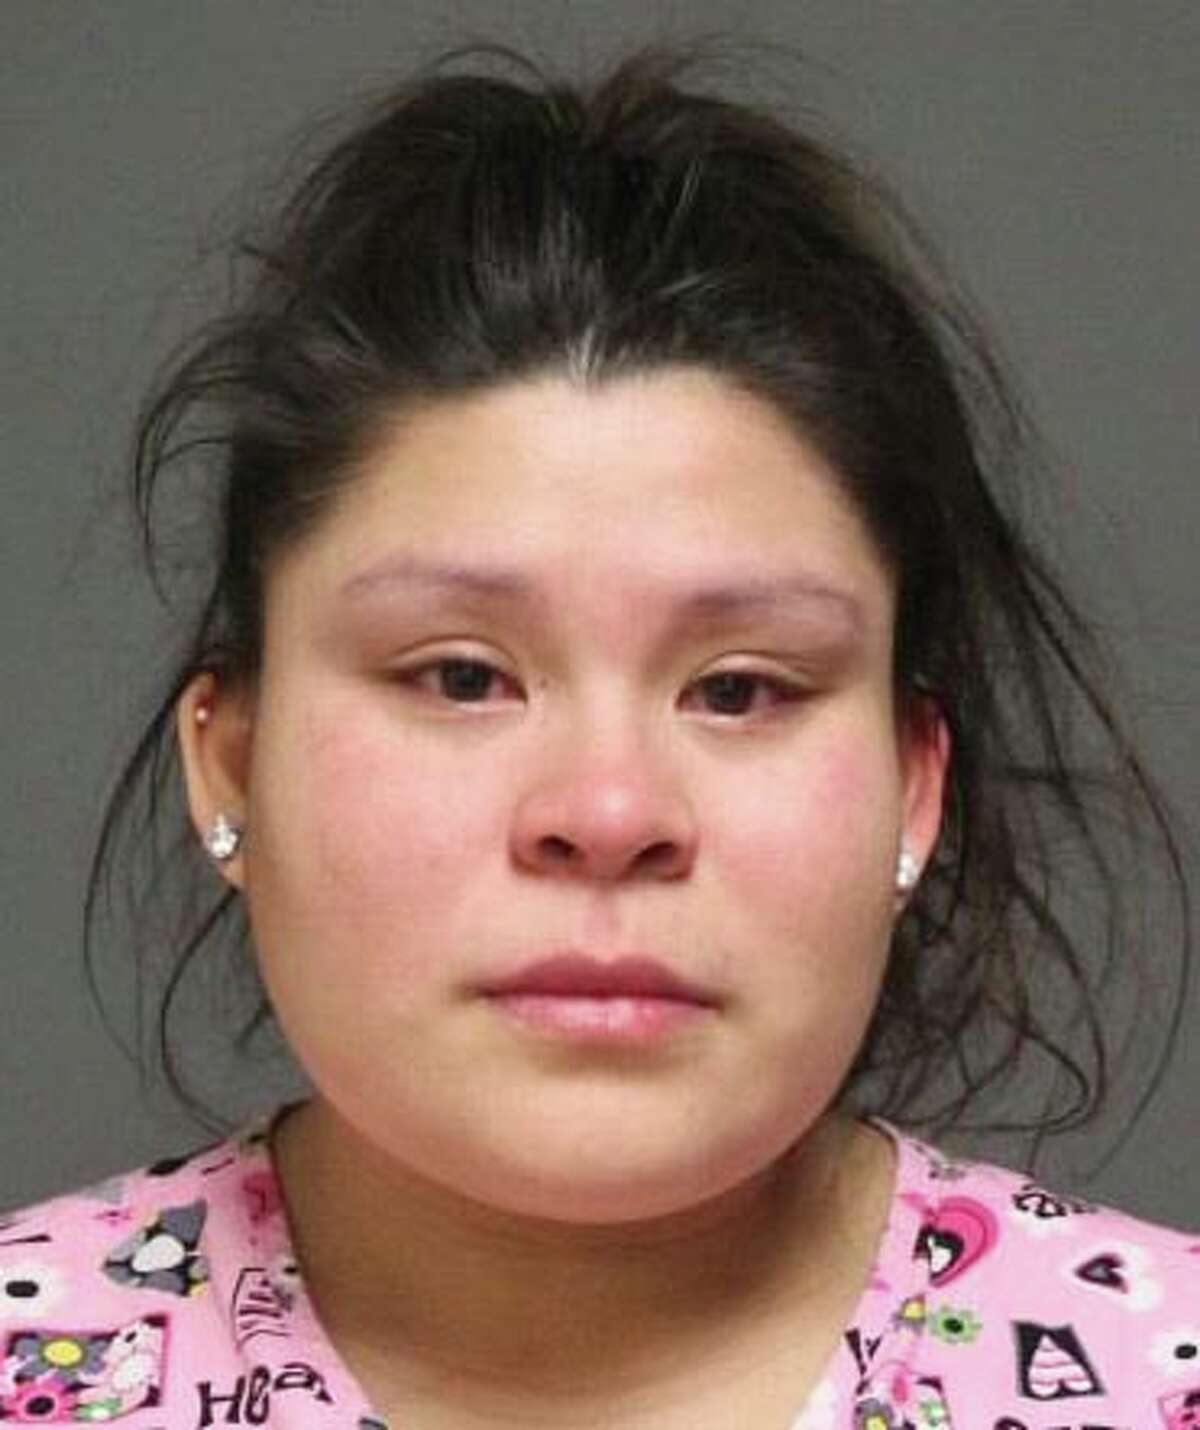 Damarisa Lopez-Sosa, 25, of Fairfield, was arrested Monday for assault and violating a protective order.